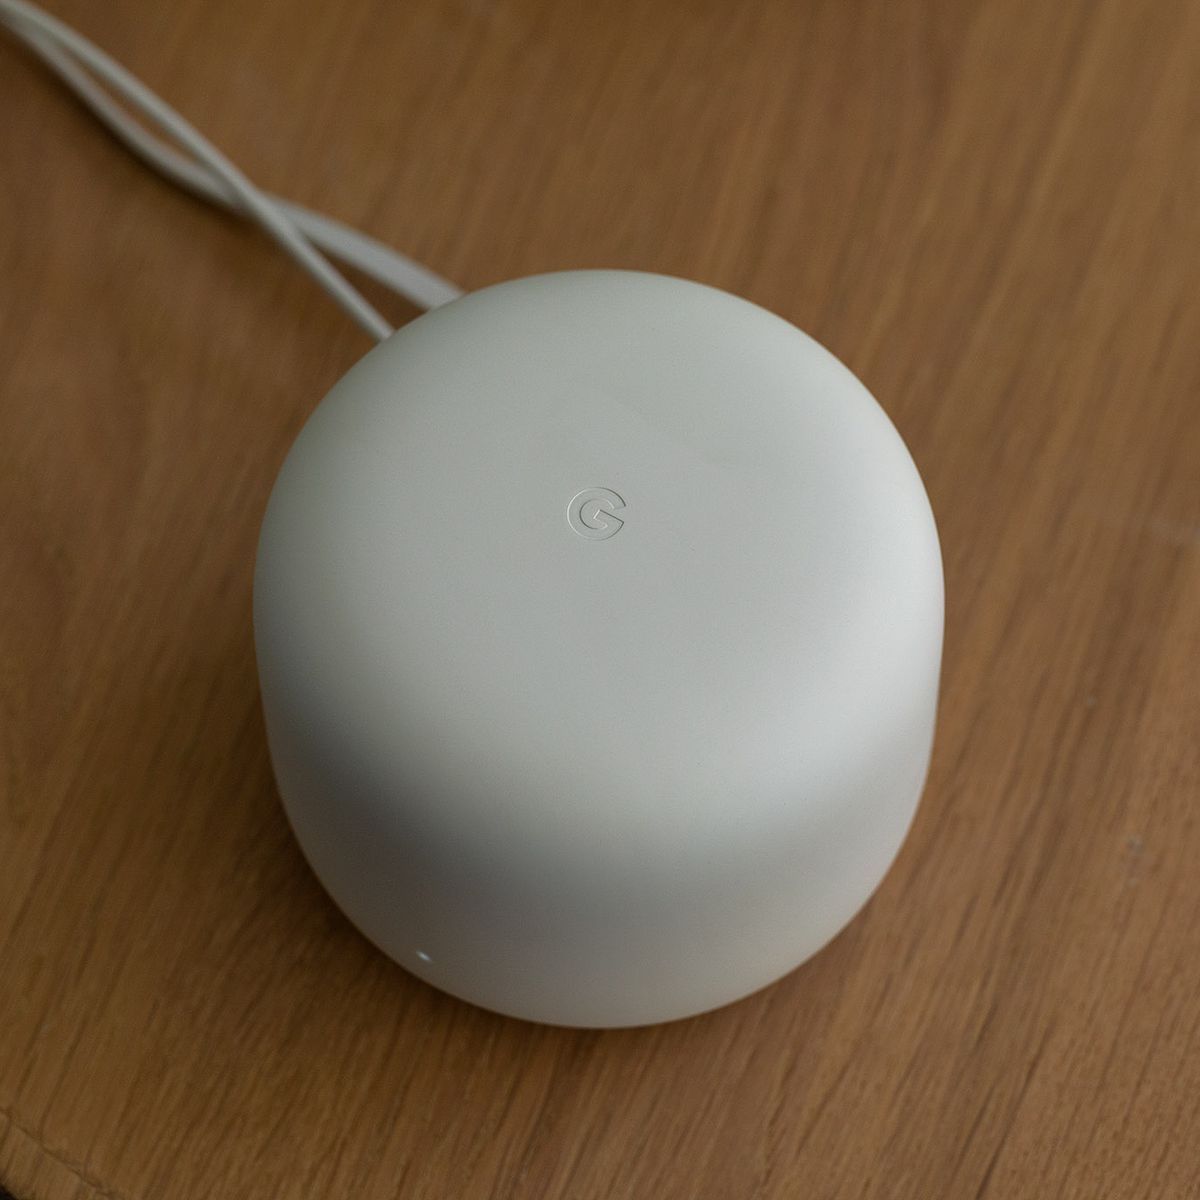 Googles nest wifi router and remote points are up to